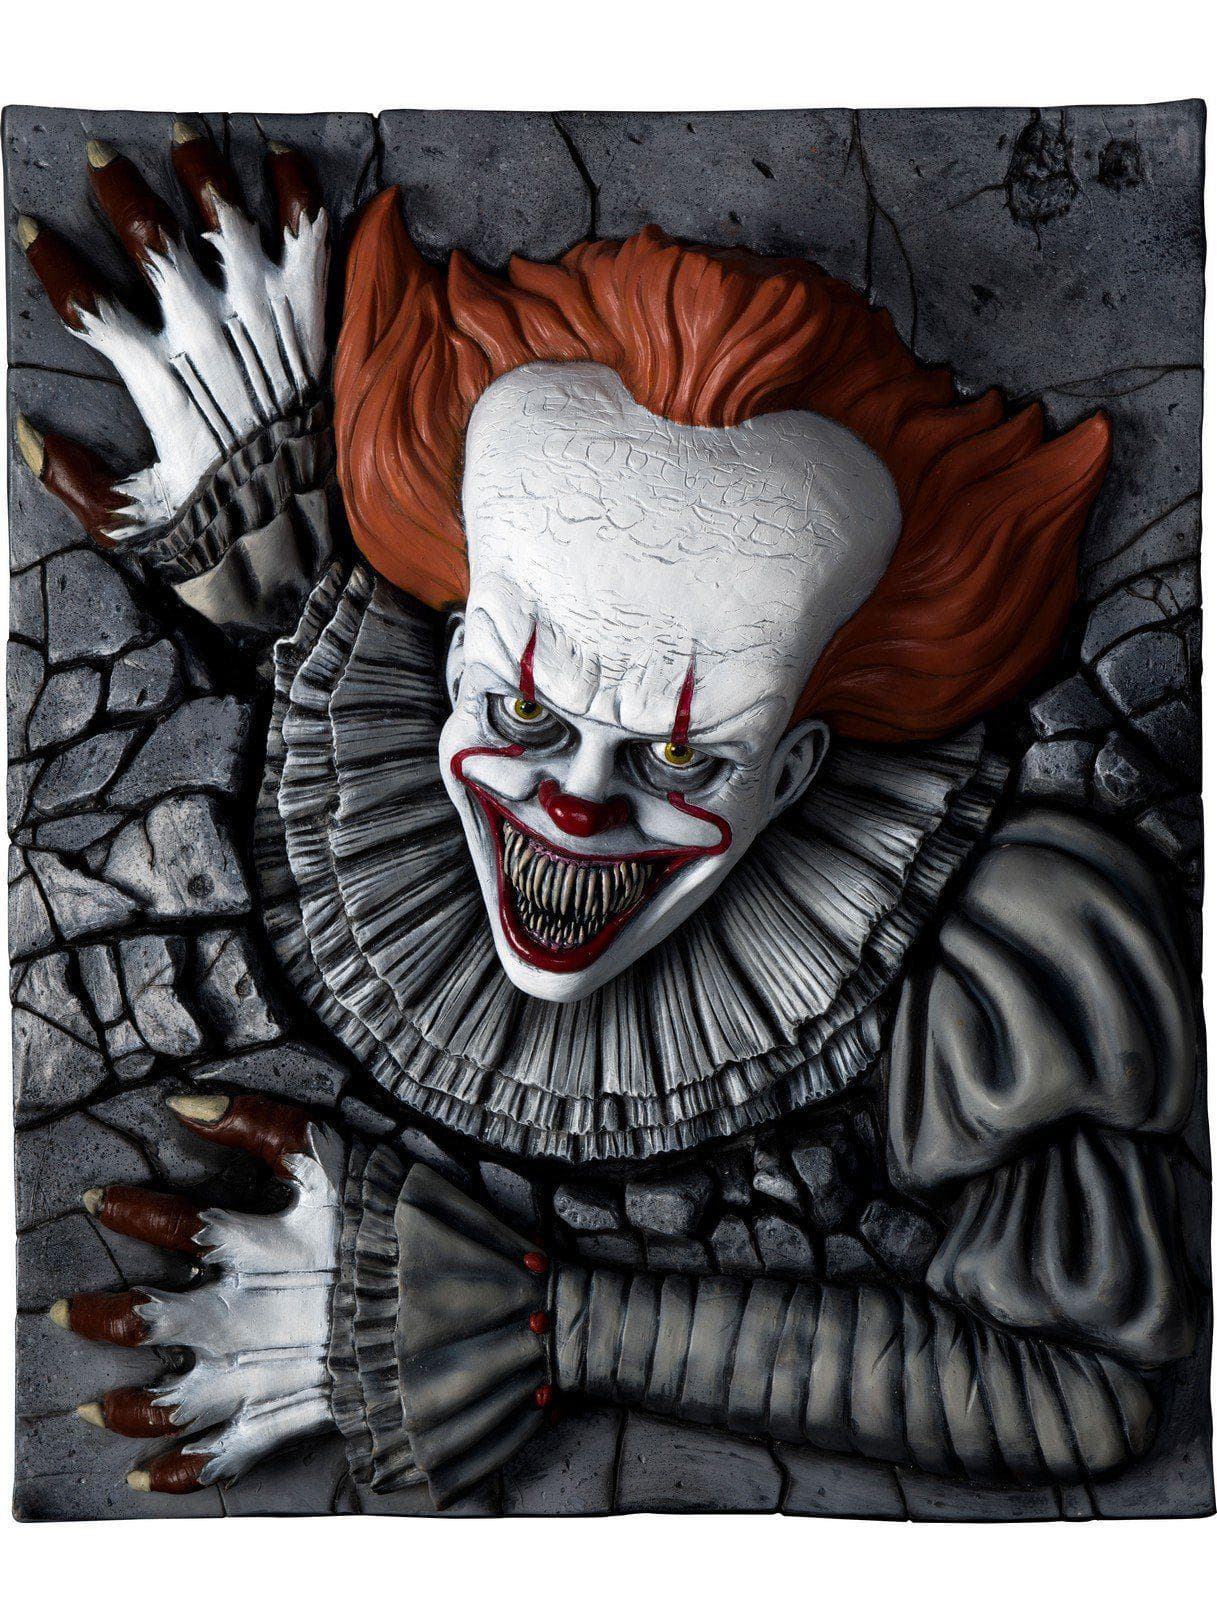 37-inch IT Pennywise Wall Breaker Decoration - costumes.com